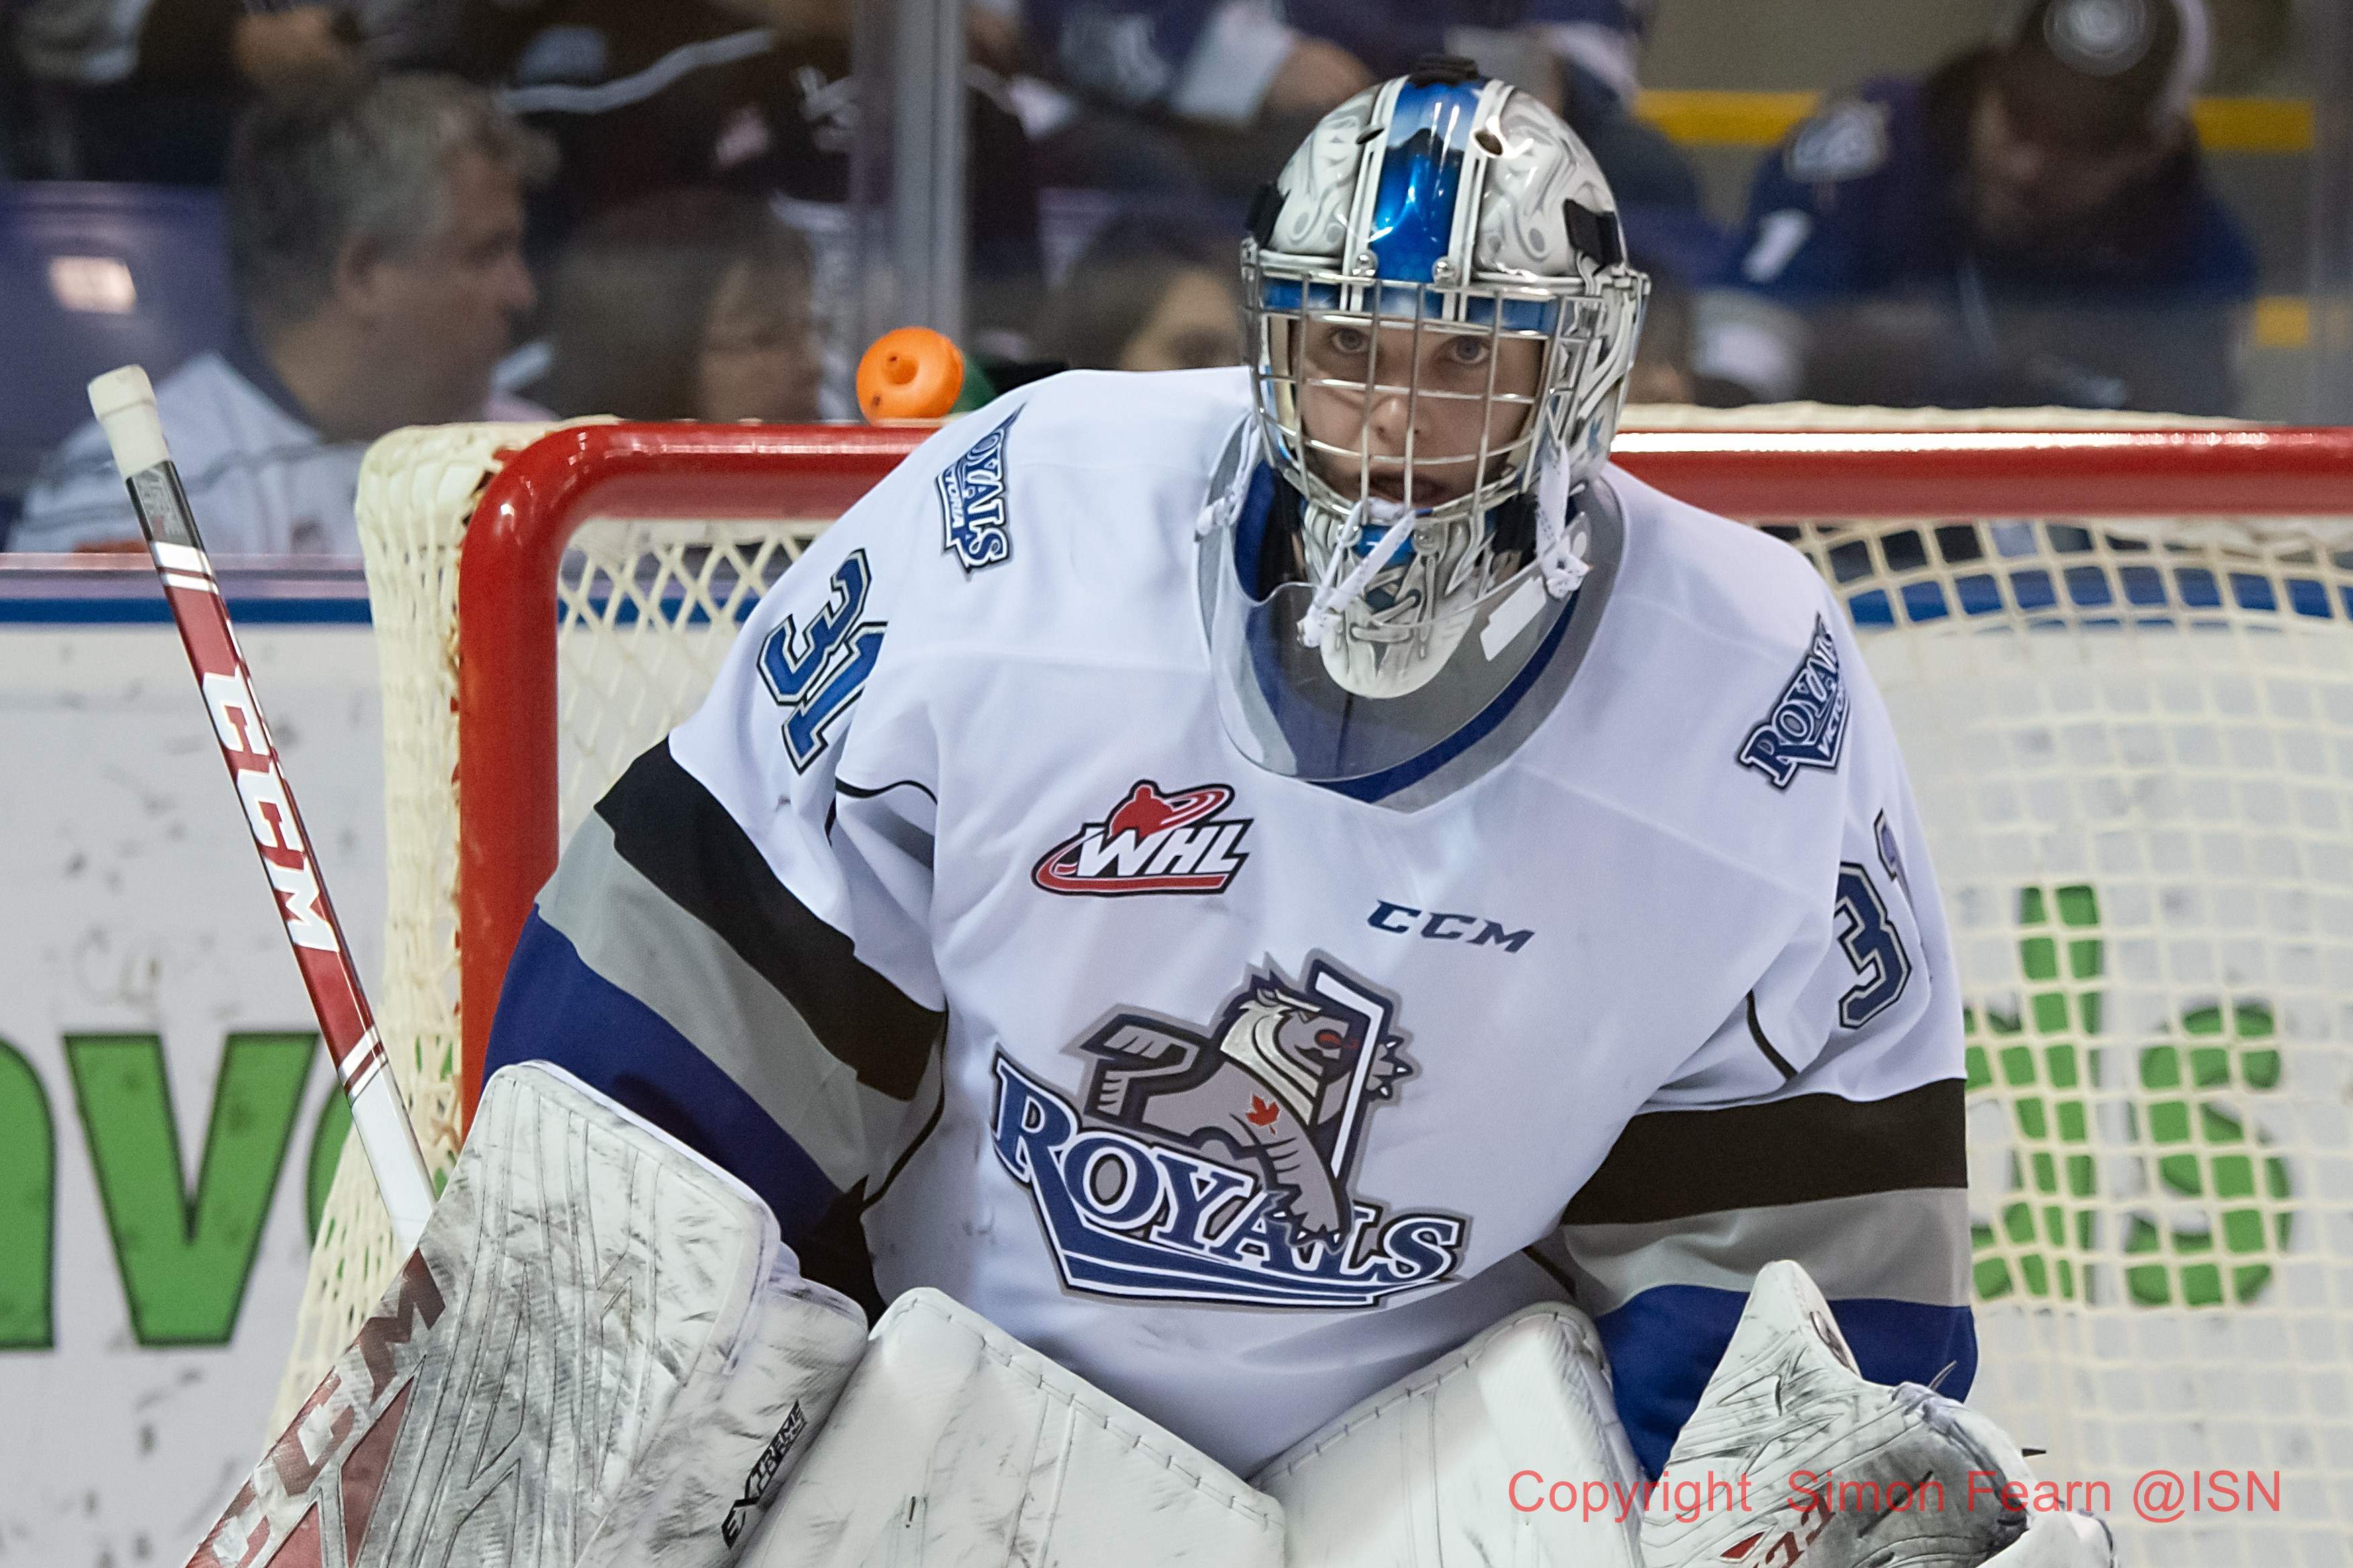 20200118; Victoria Royals host the Vancouver Giants at Save on Foods Memorial Arena. Photos copyright Simon Fearn